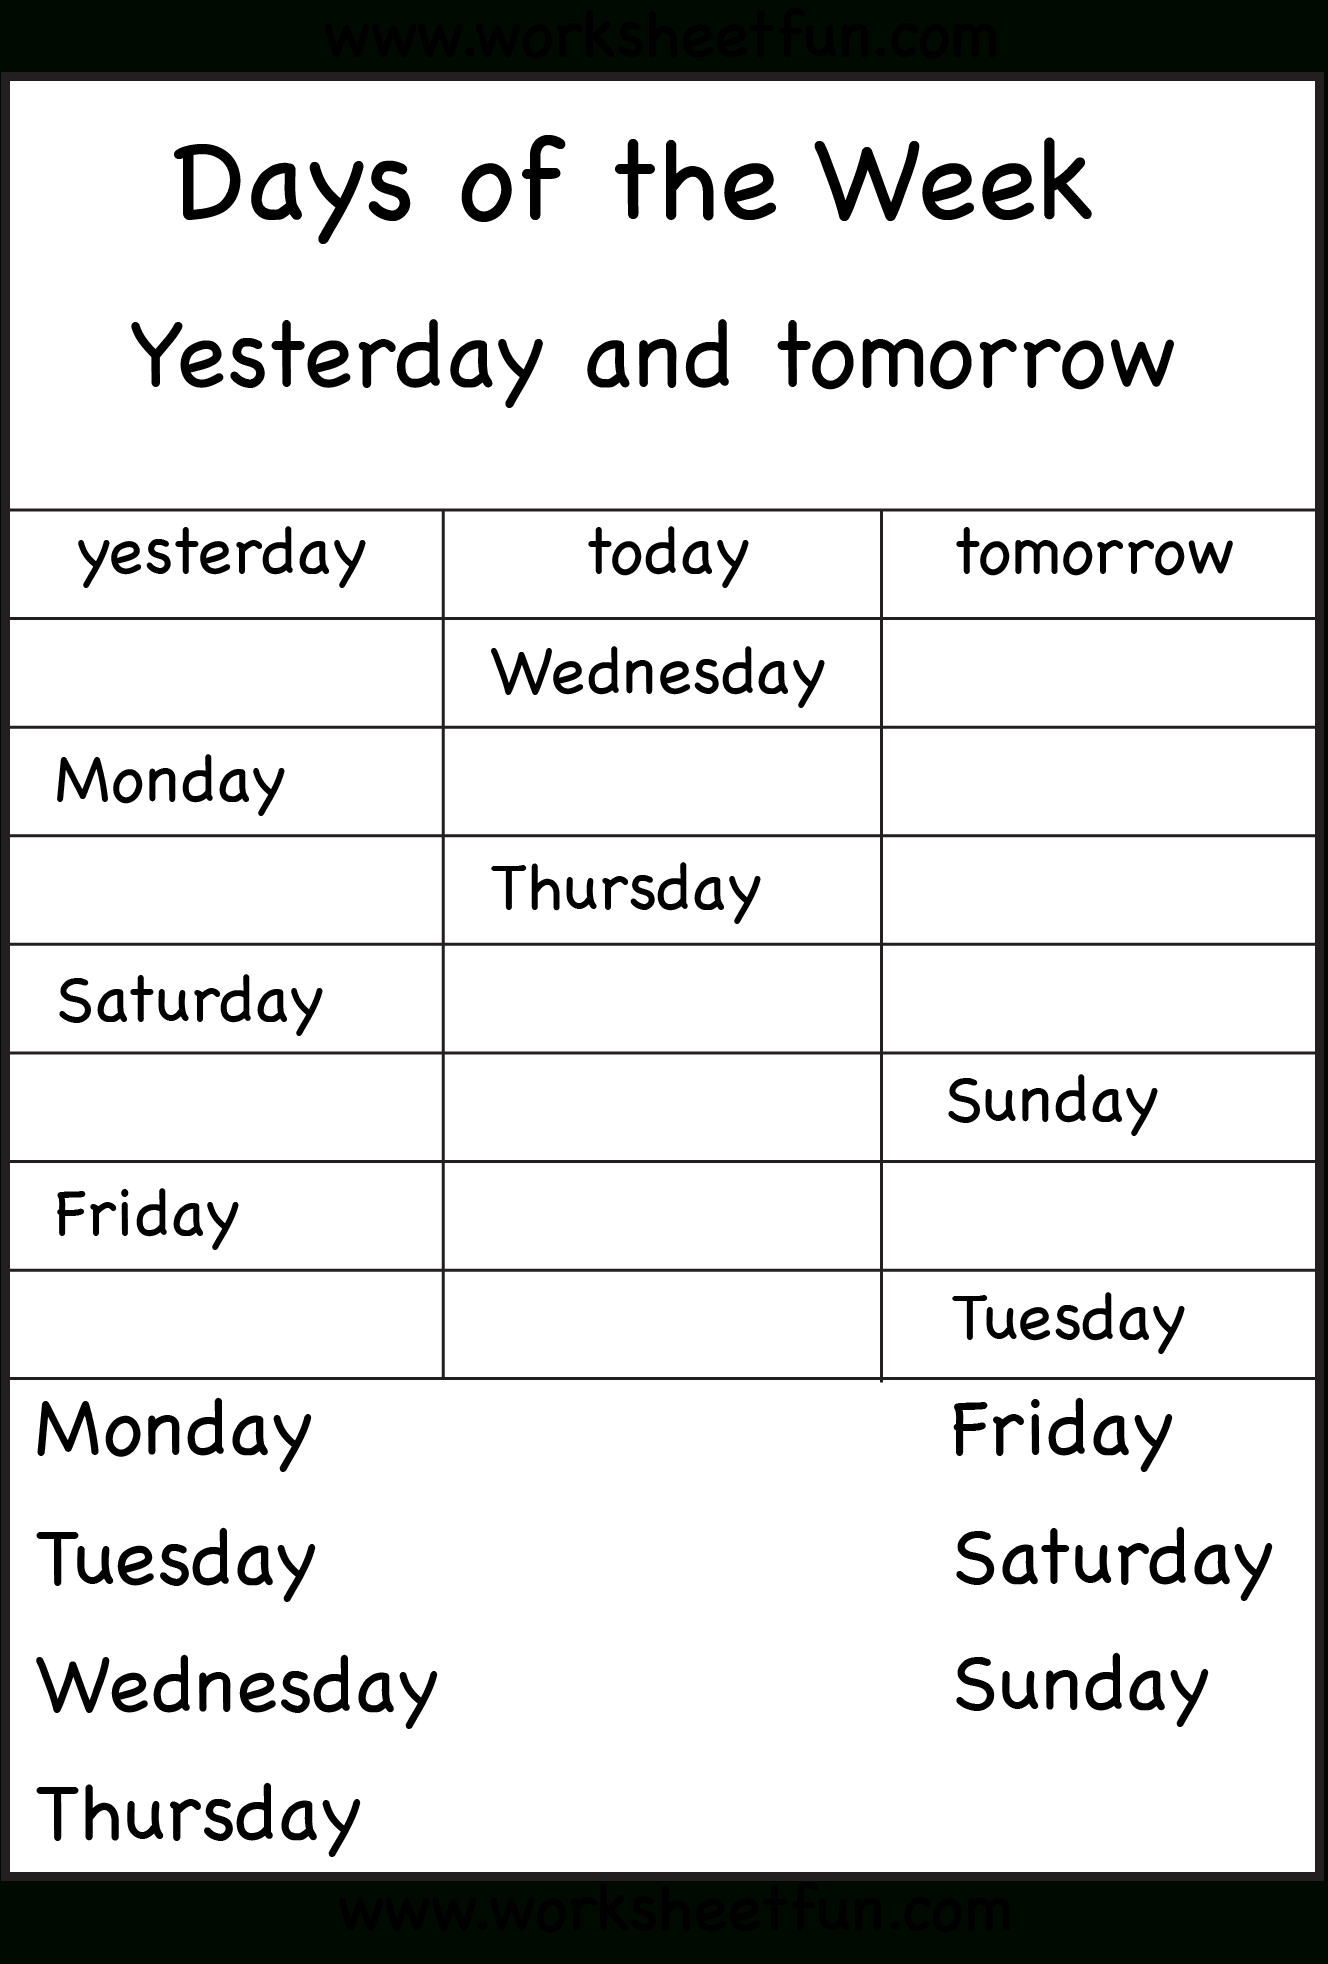 Days Of The Week Yesterday And Tomorrow 6 Worksheets 1